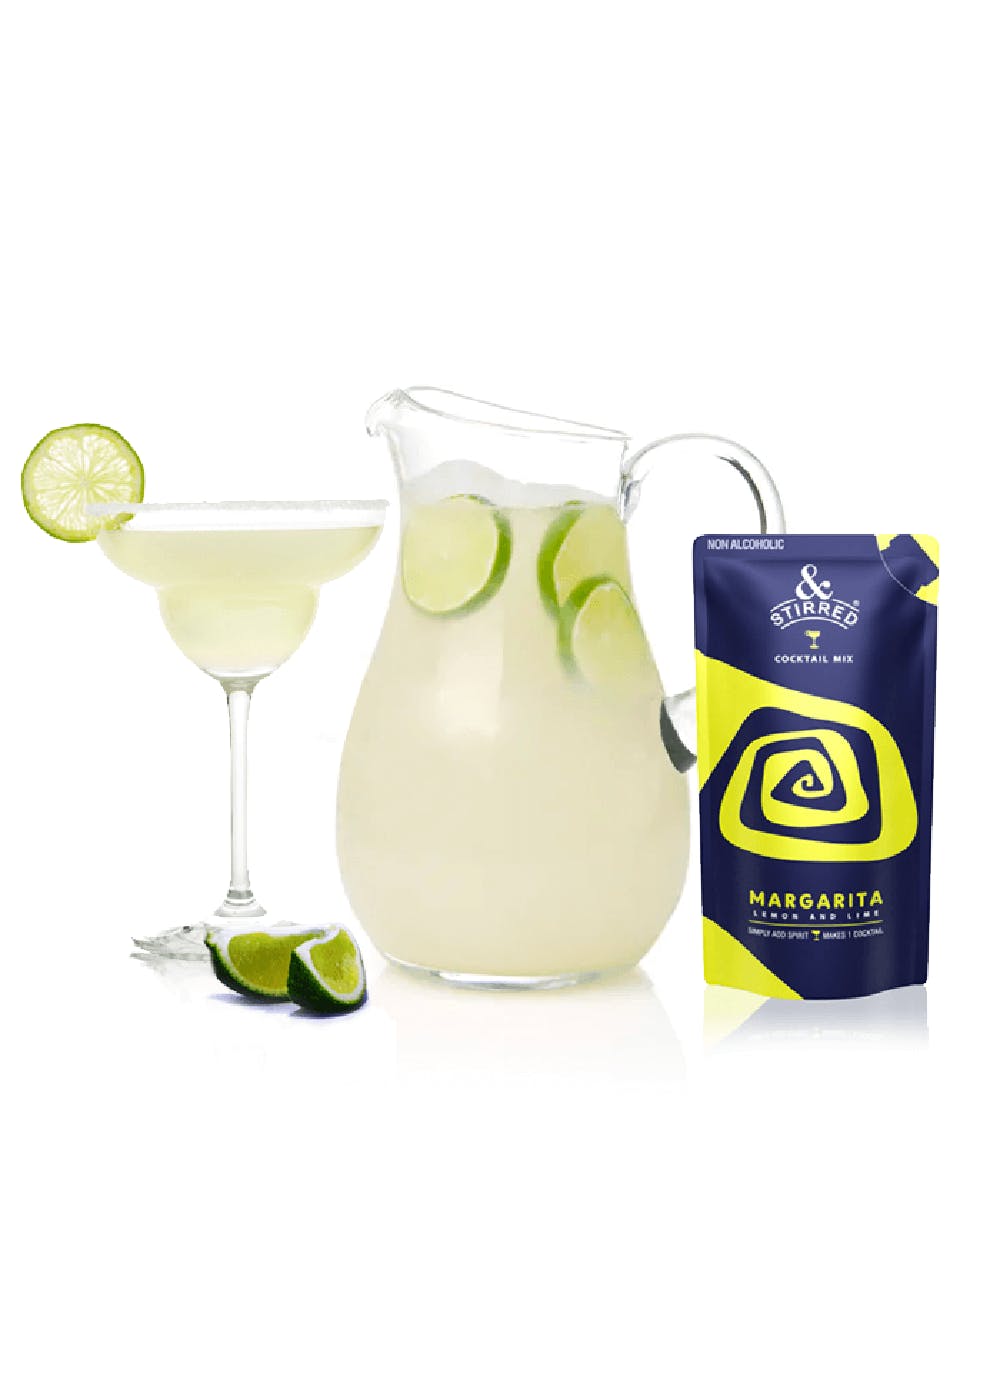 Margarita - Combo Pack of 8 (Pitcher Pack) + 1 Peg Measure + 4 Coasters